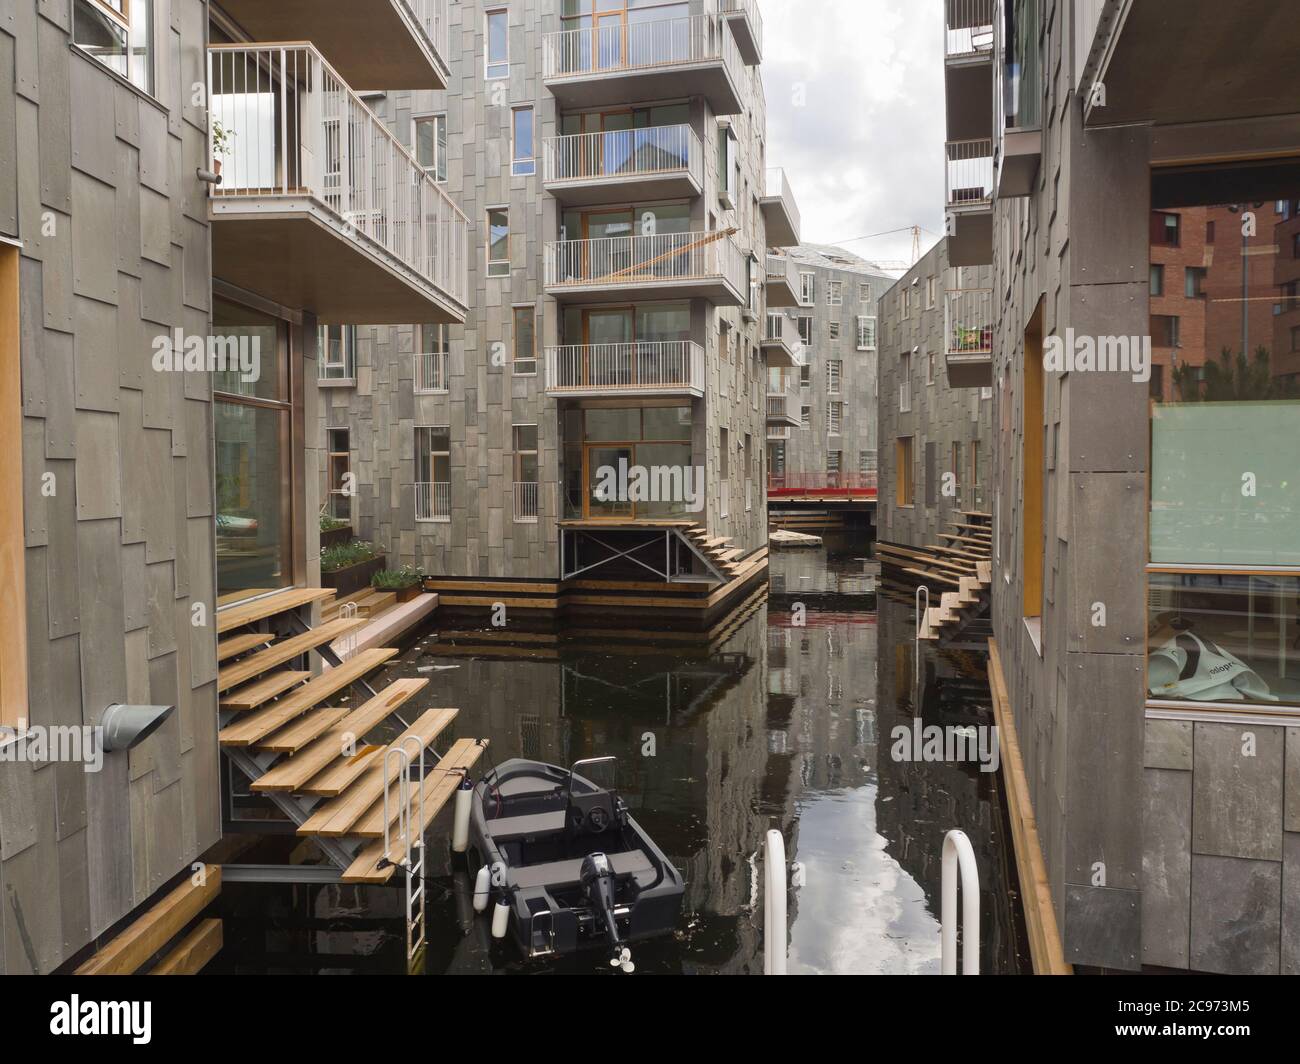 A new layer of buildings is being added in Bjorvika Oslo Norway directly on the fjord, business and apartment blocks combined, detail from canals Stock Photo